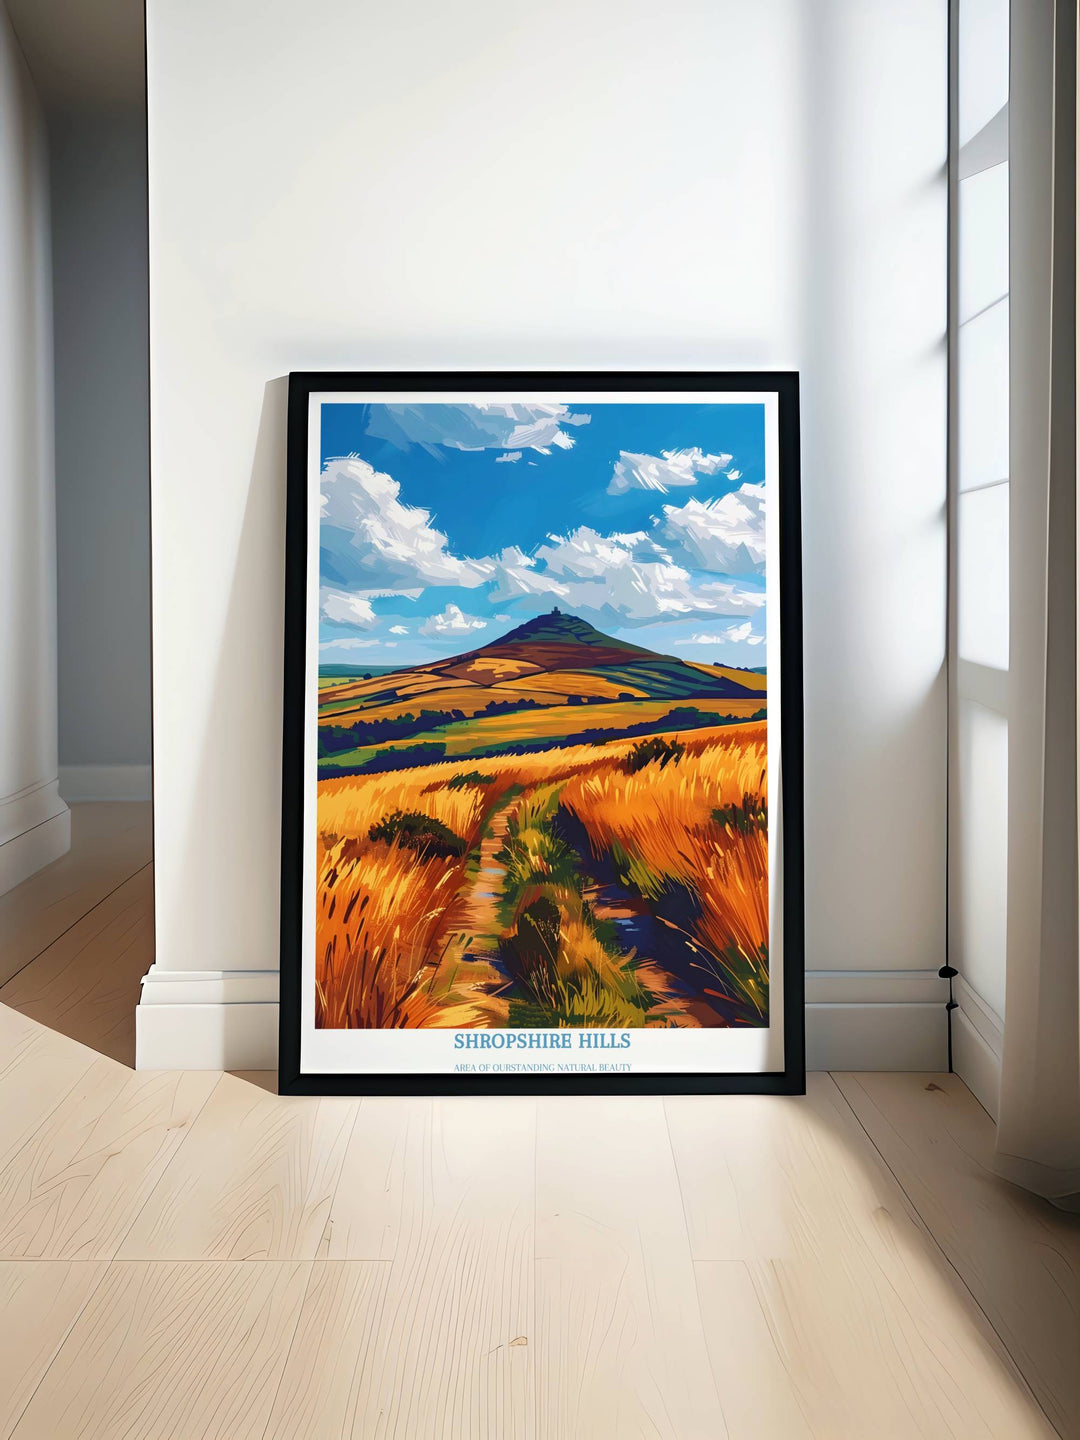 Indulge in the captivating allure of the Shropshire Hills with this exquisite travel print wall art, showcasing the majestic vistas of The Long Mynd within the renowned Area of Outstanding Natural Beauty.